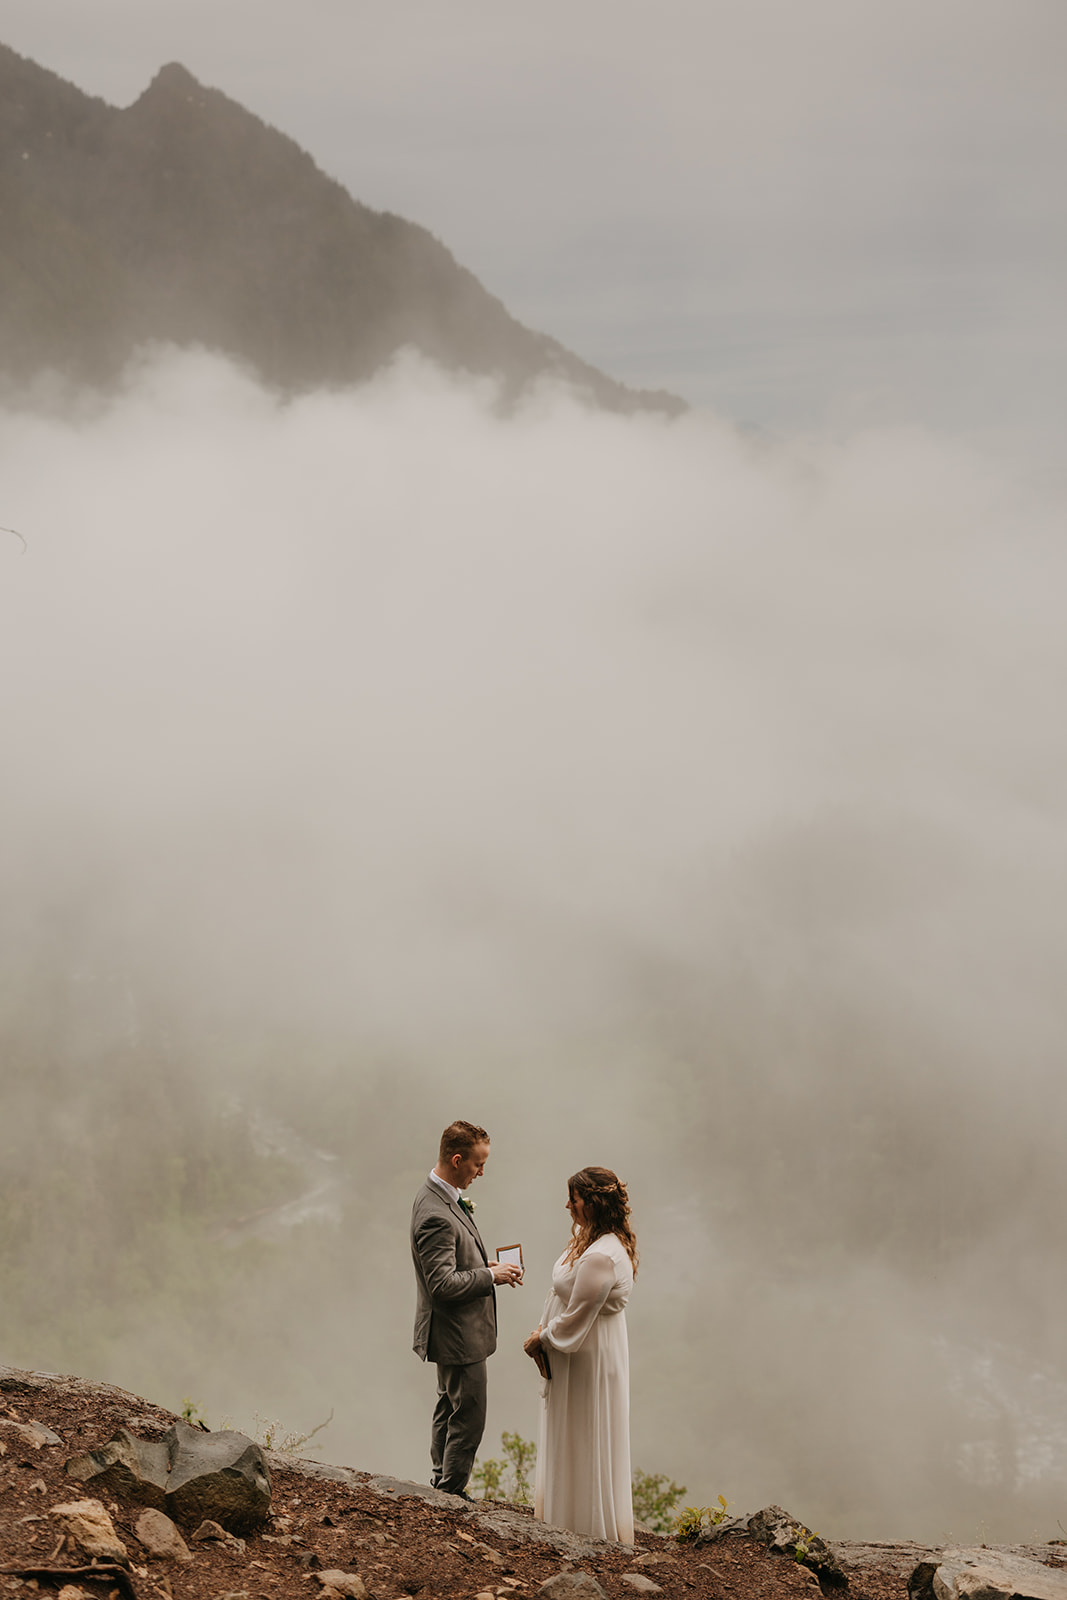 Whimsical Romance in a Rainy PNW Elopement | Mountainside Bride